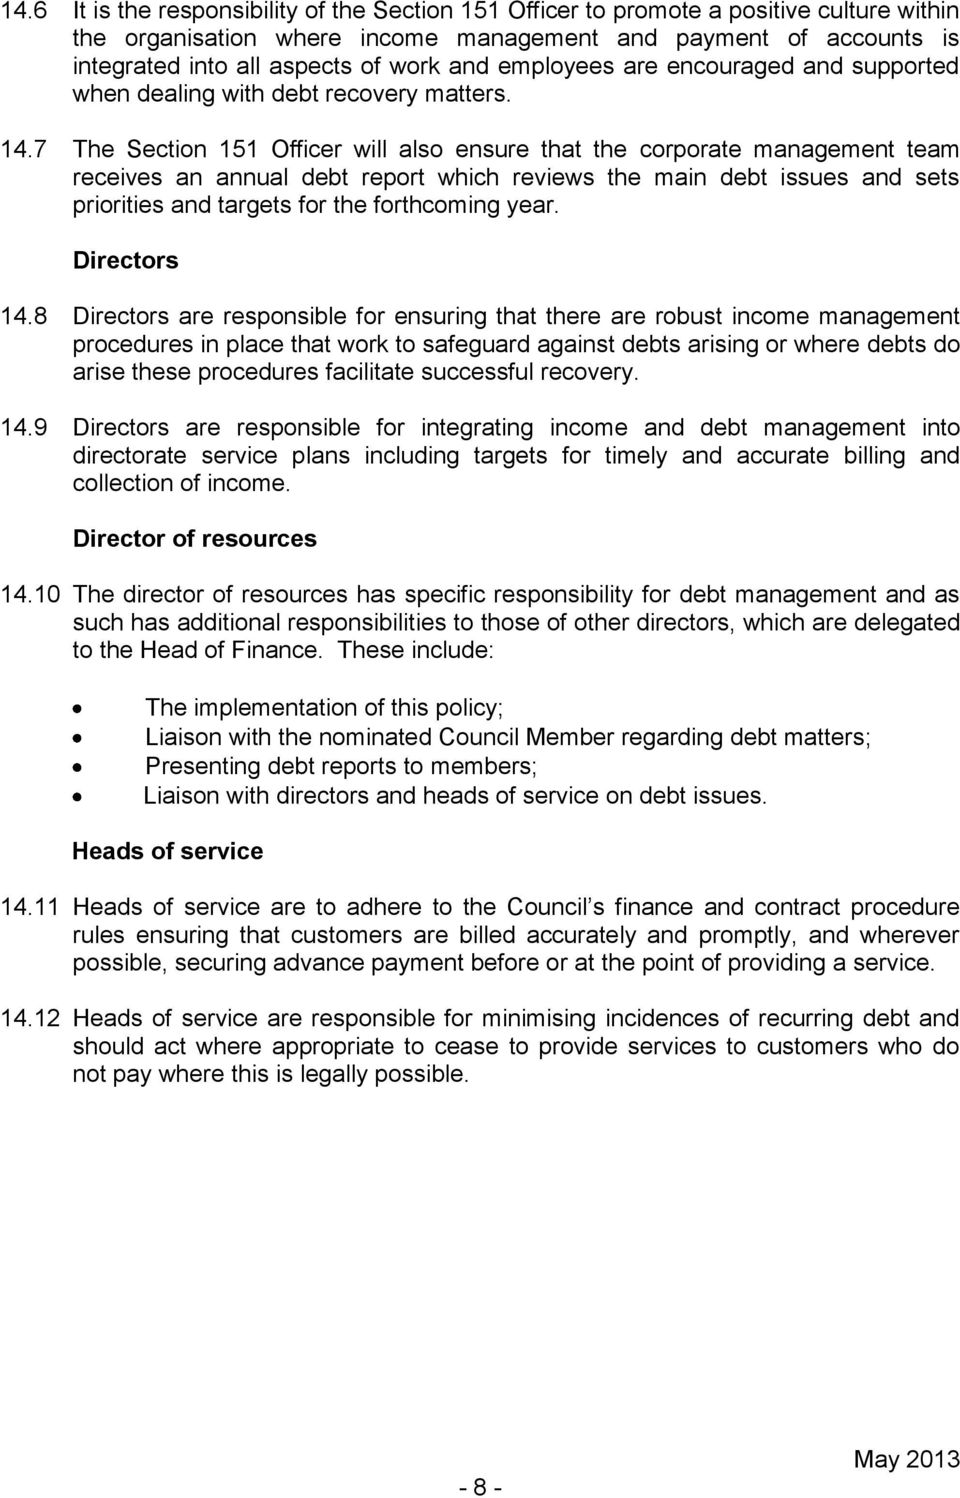 7 The Section 151 Officer will also ensure that the corporate management team receives an annual debt report which reviews the main debt issues and sets priorities and targets for the forthcoming